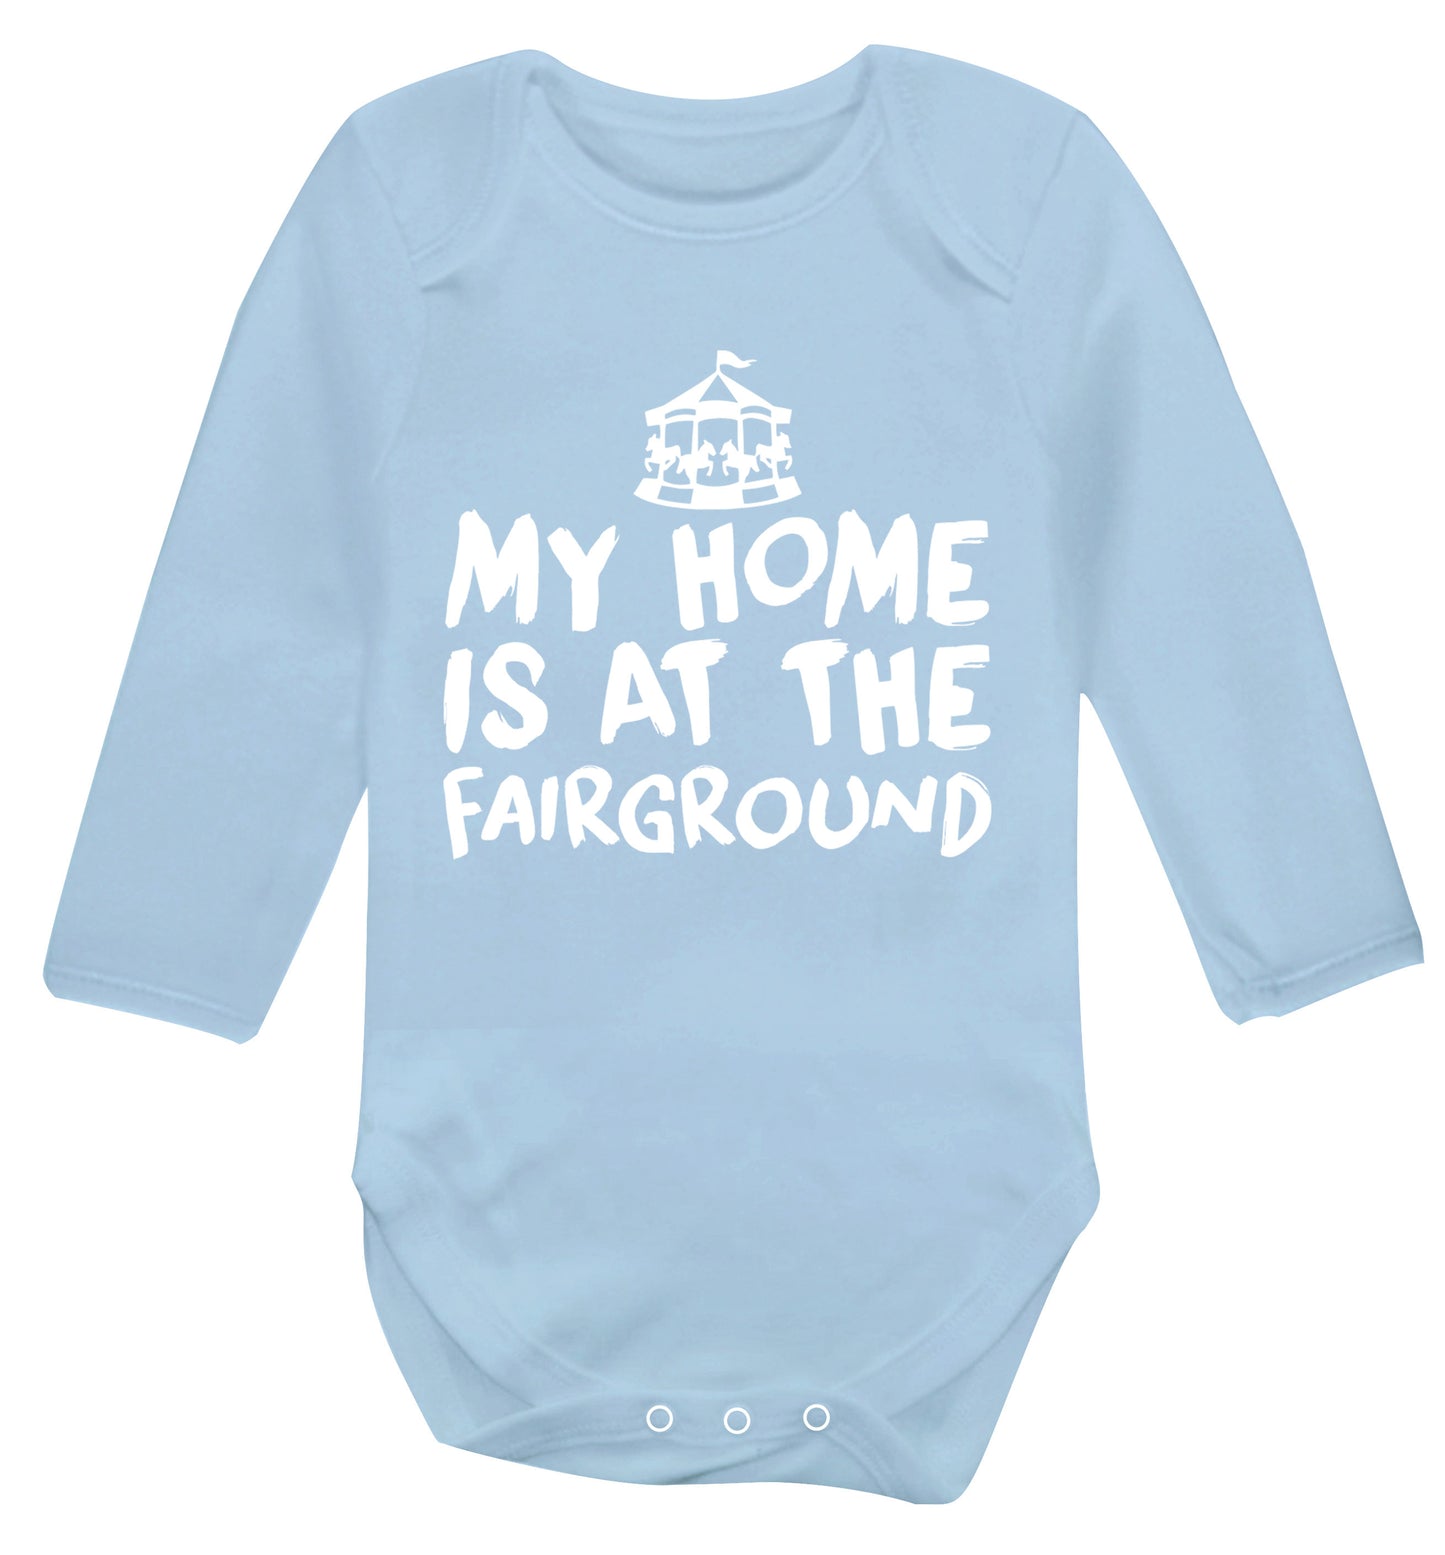 My home is at the fairground Baby Vest long sleeved pale blue 6-12 months